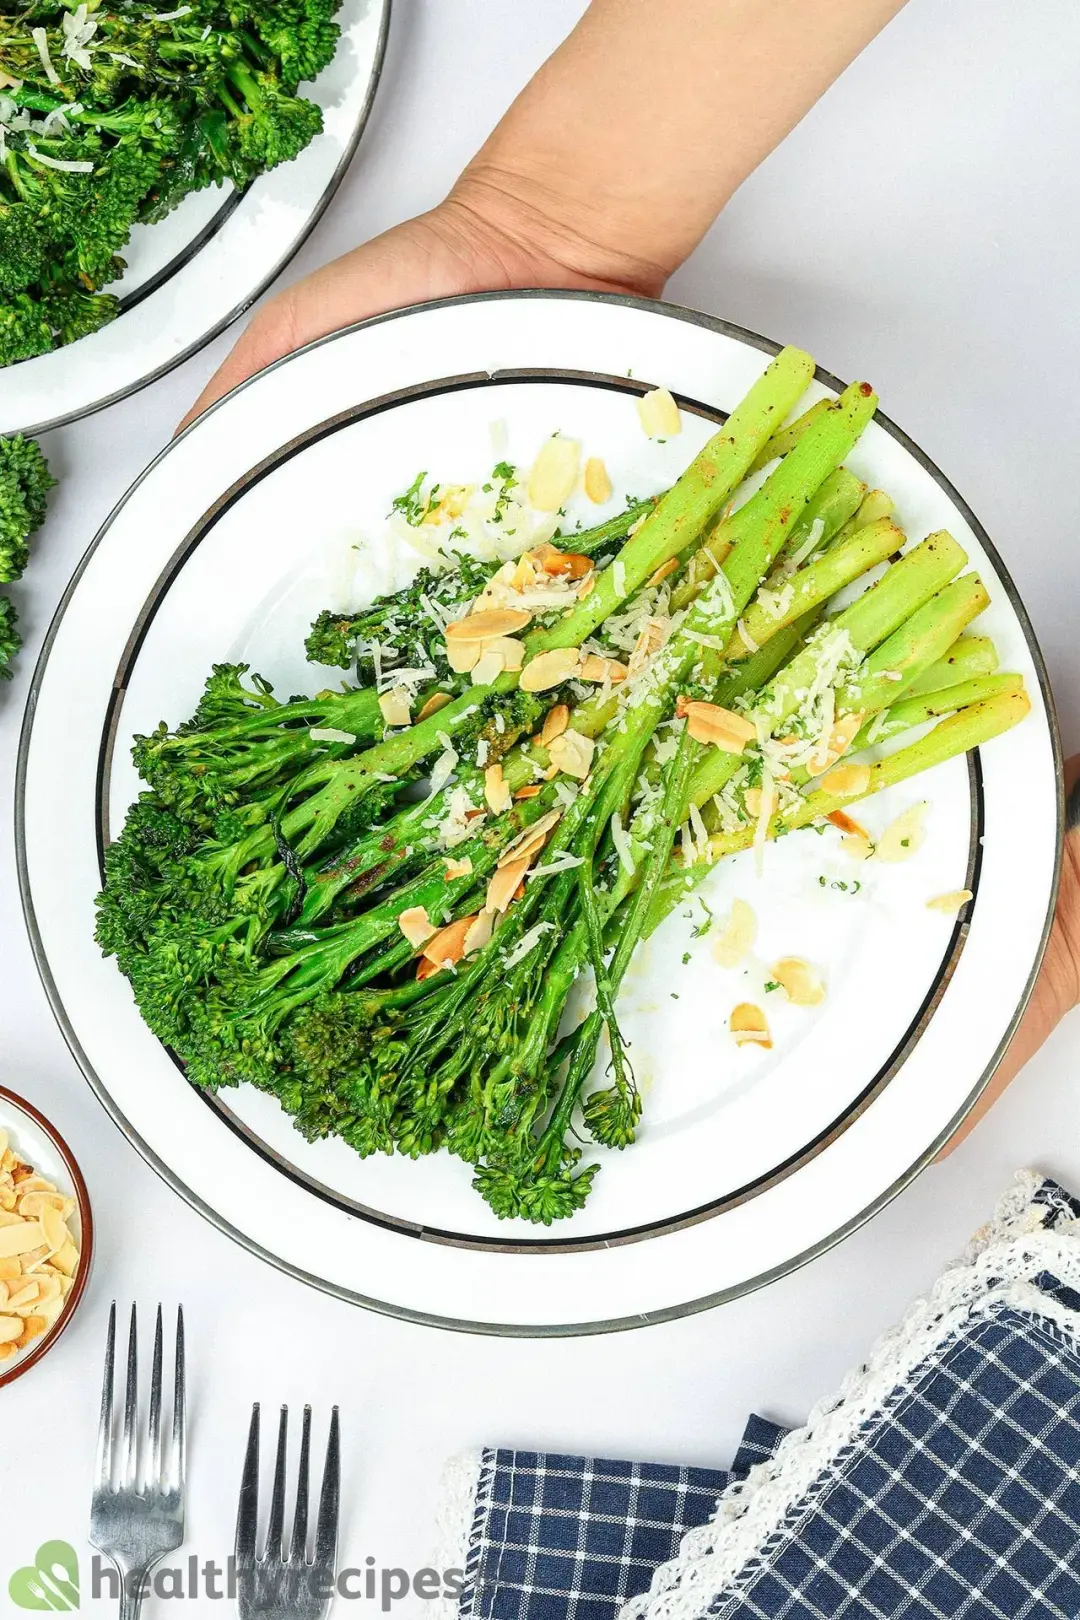 How to Store the Leftovers Roasted Baby Broccoli